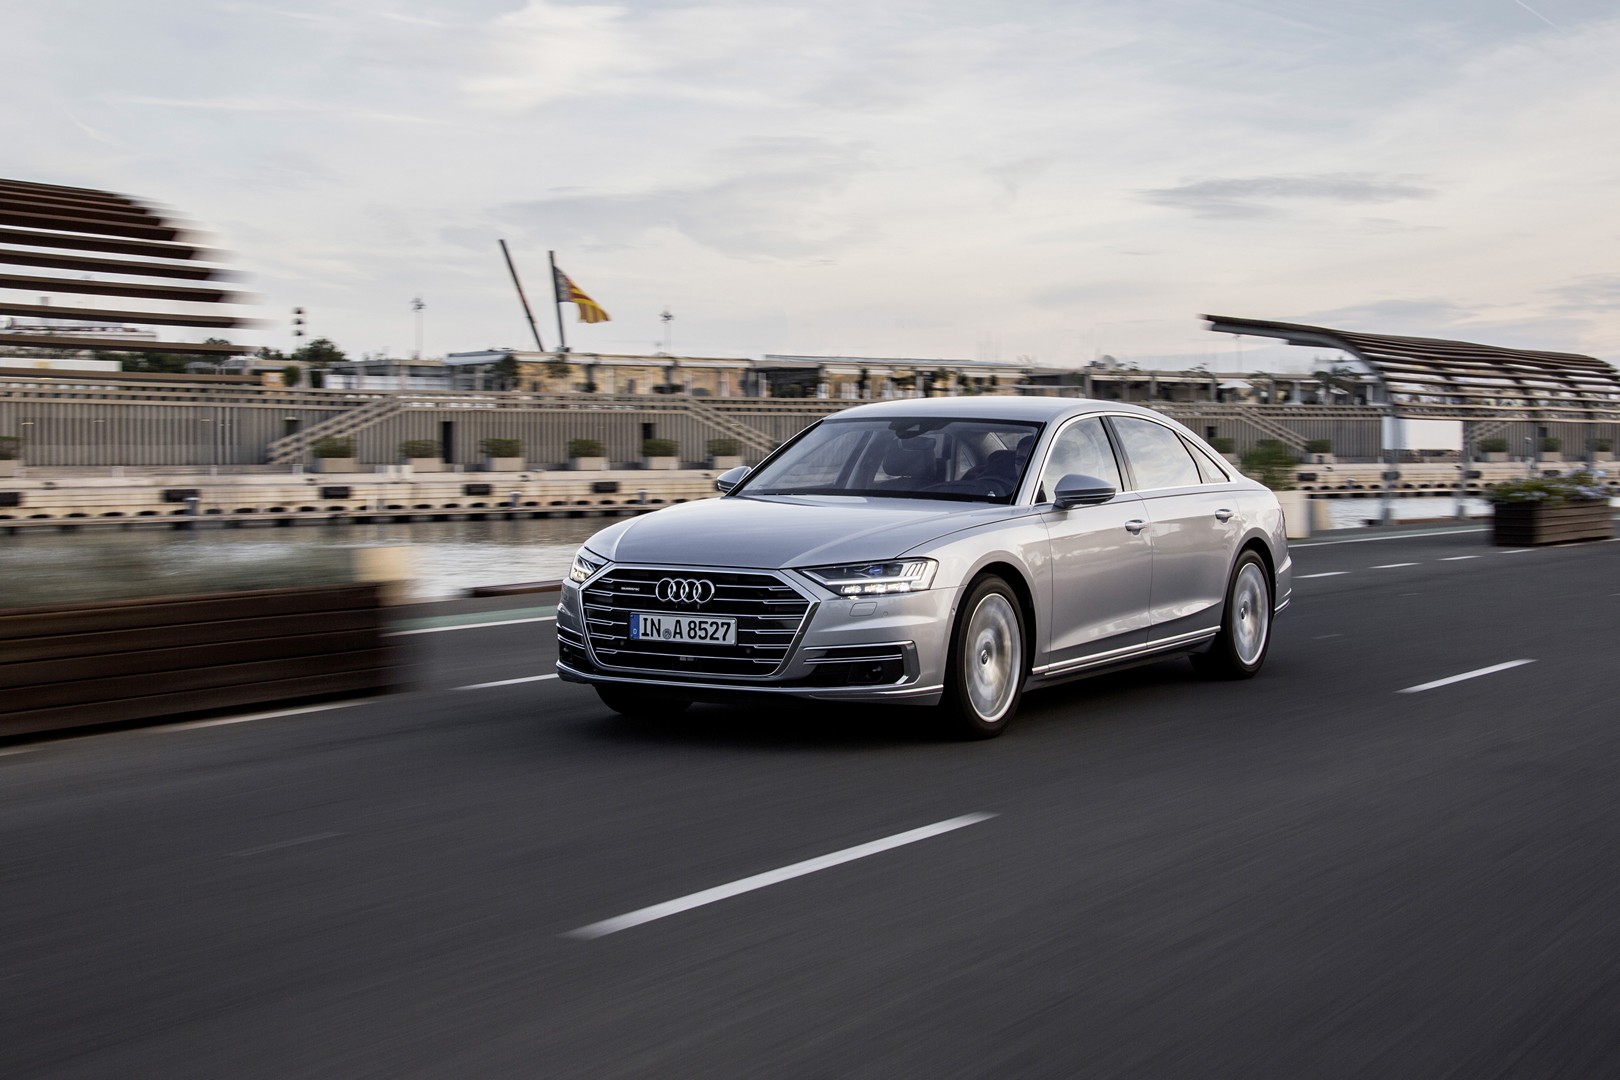 2019 Audi A8 to Debut Prologue Styling at LA Auto Show ...